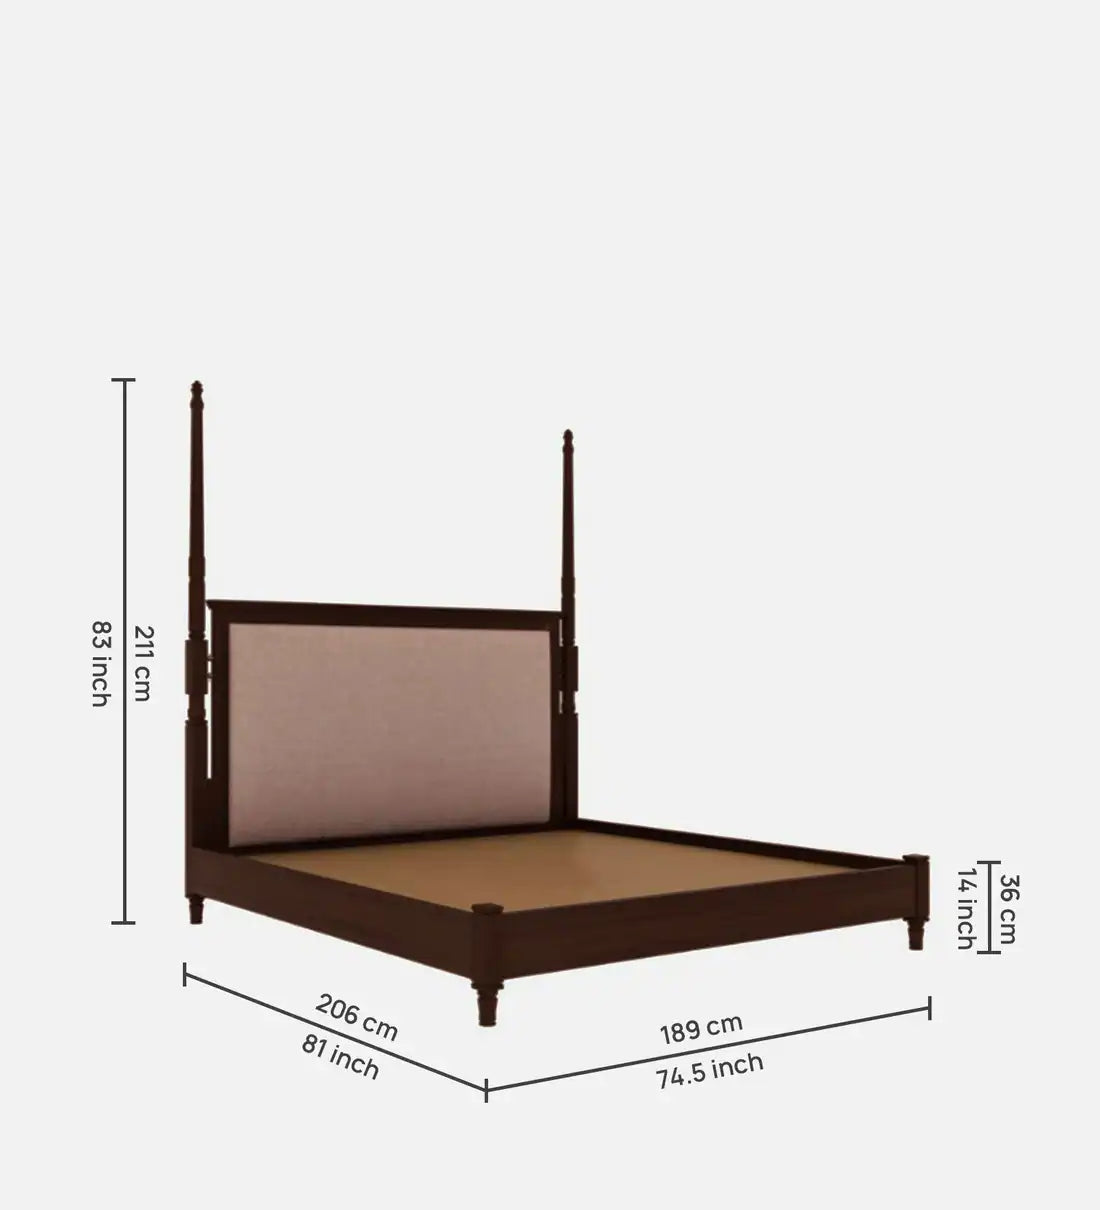 Oreal Solid Wood King Size Bed in Tubbaq Finish